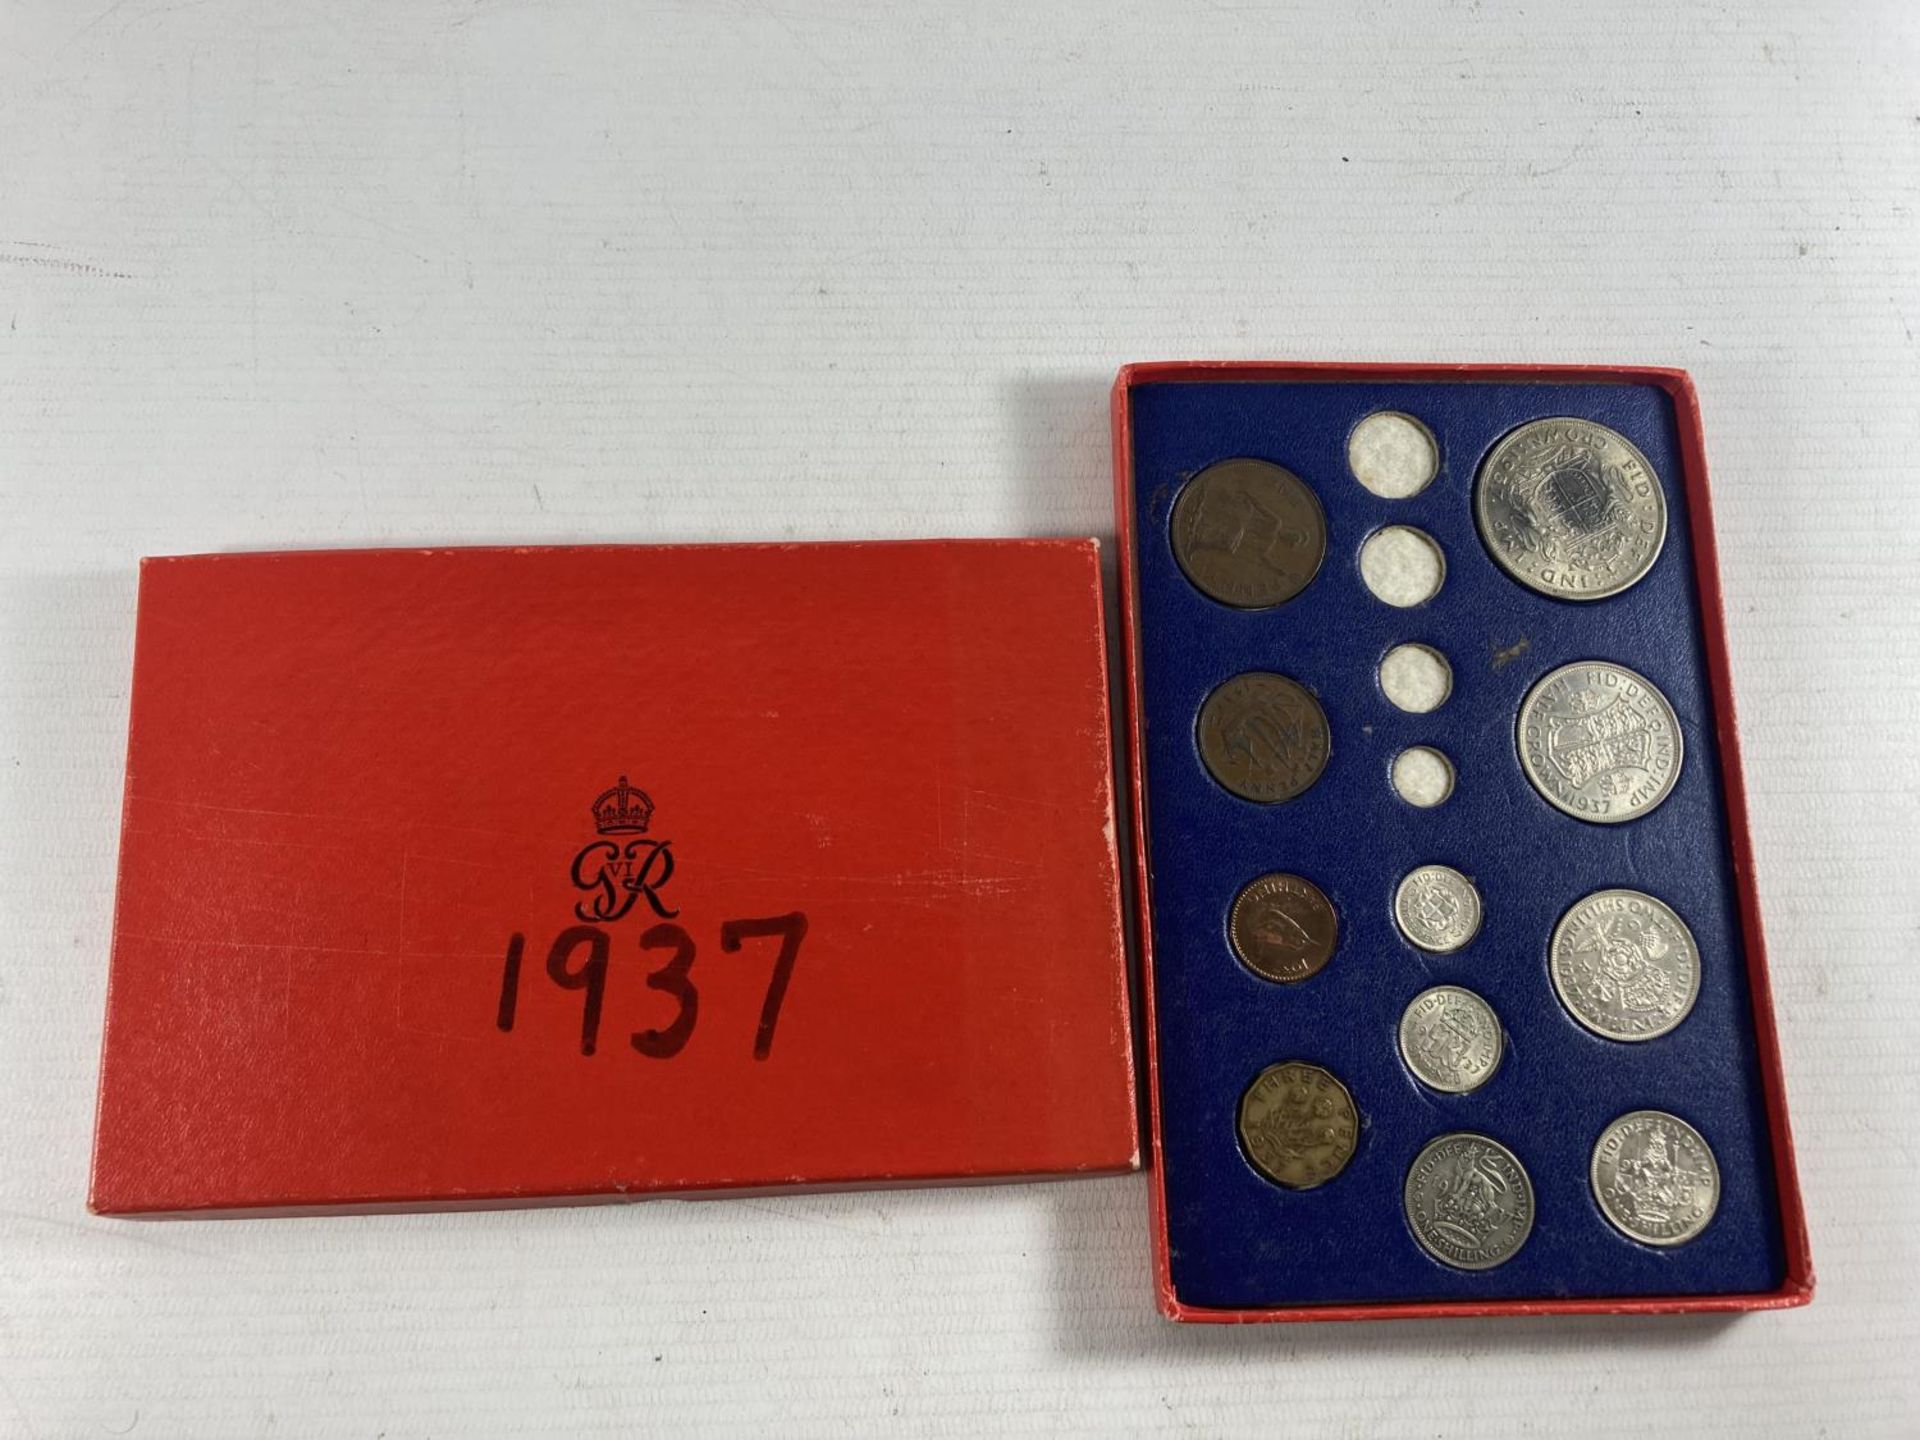 UK 1937 COIN SET , LESS MAUNDY MONEY . 11 COINS IN TOTAL